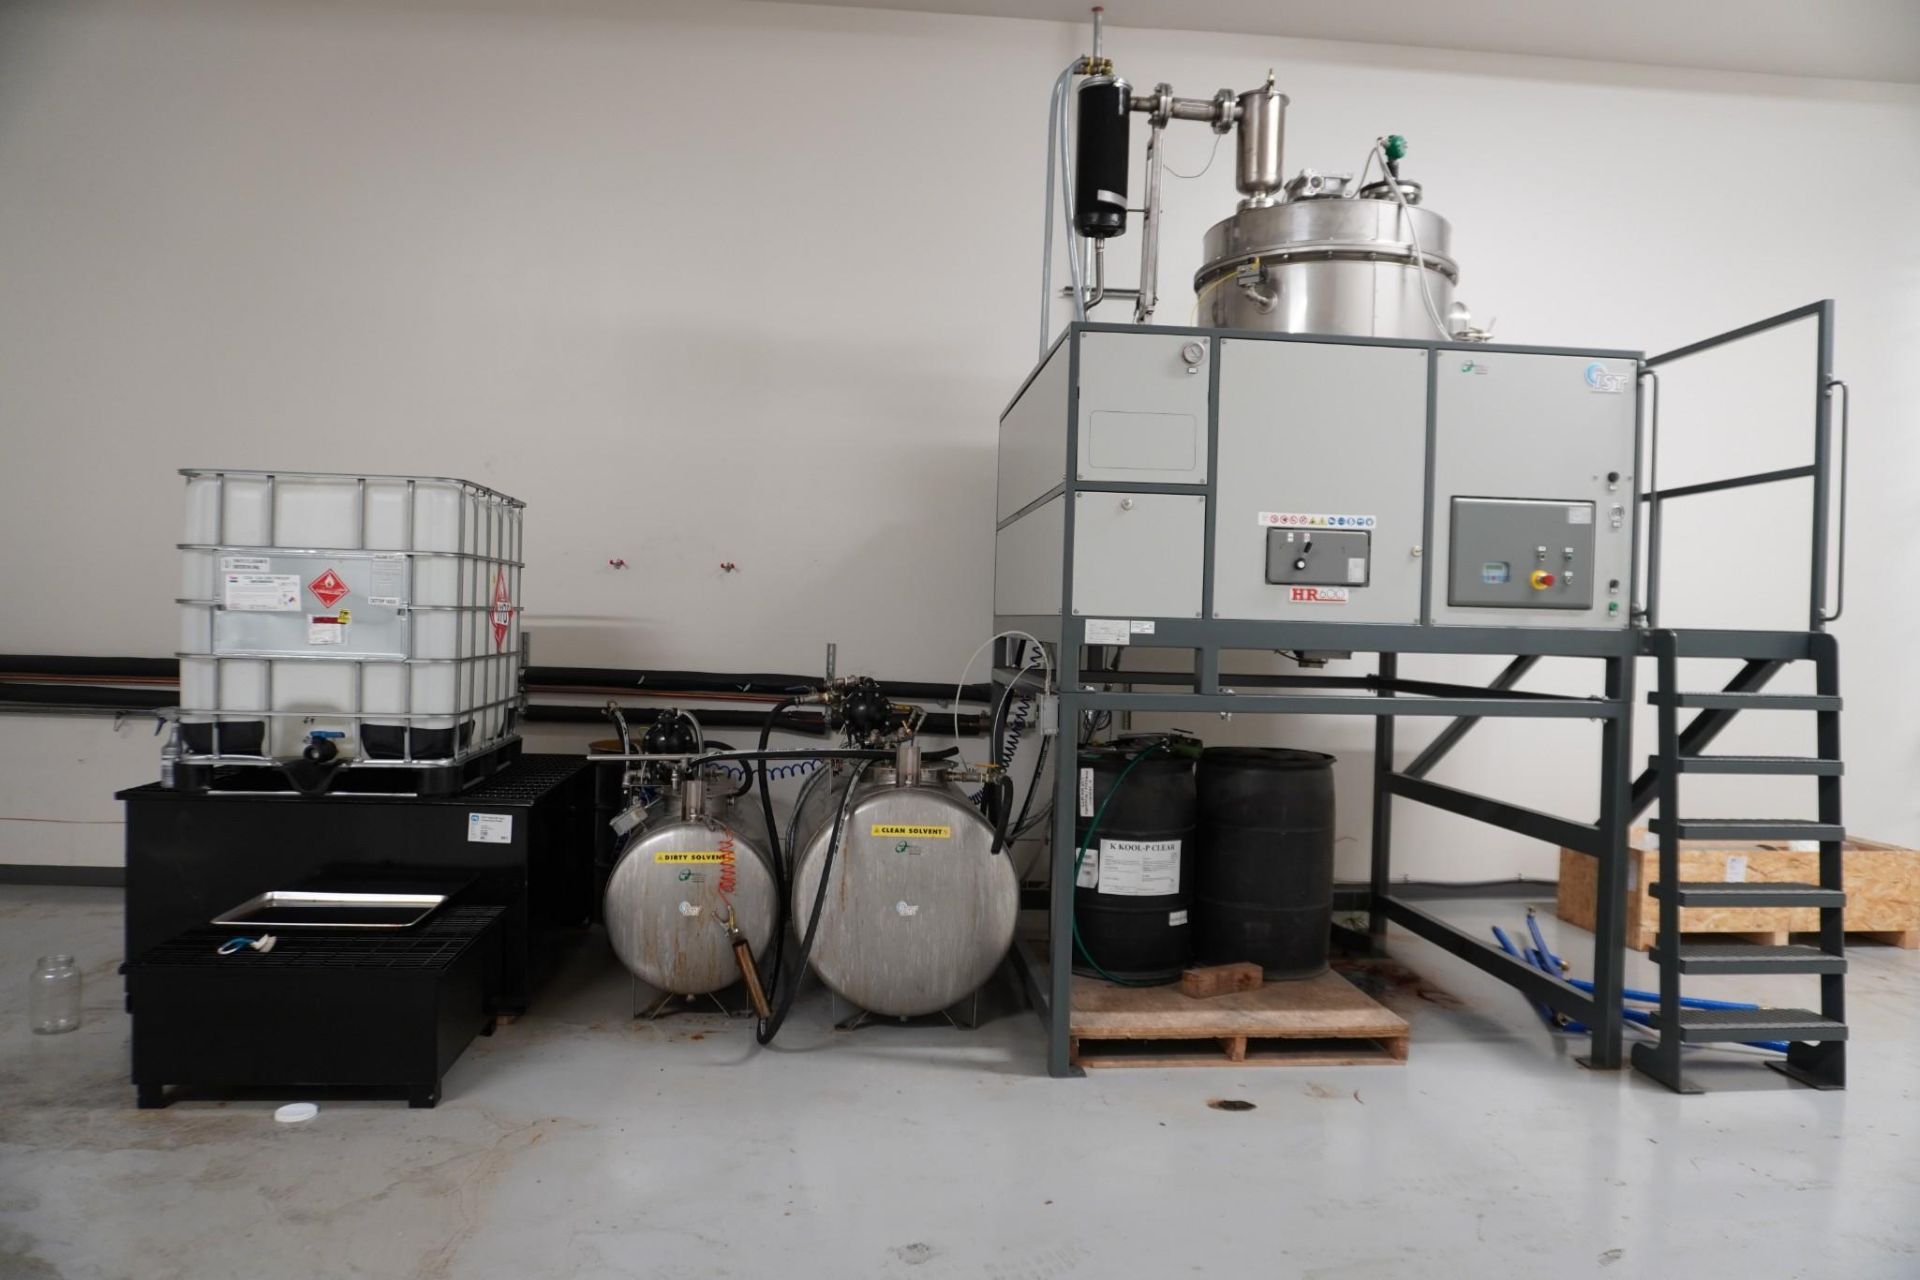 USED IST HR 600 AUTOMATED SOLVENT RECOVERY SYSTEM